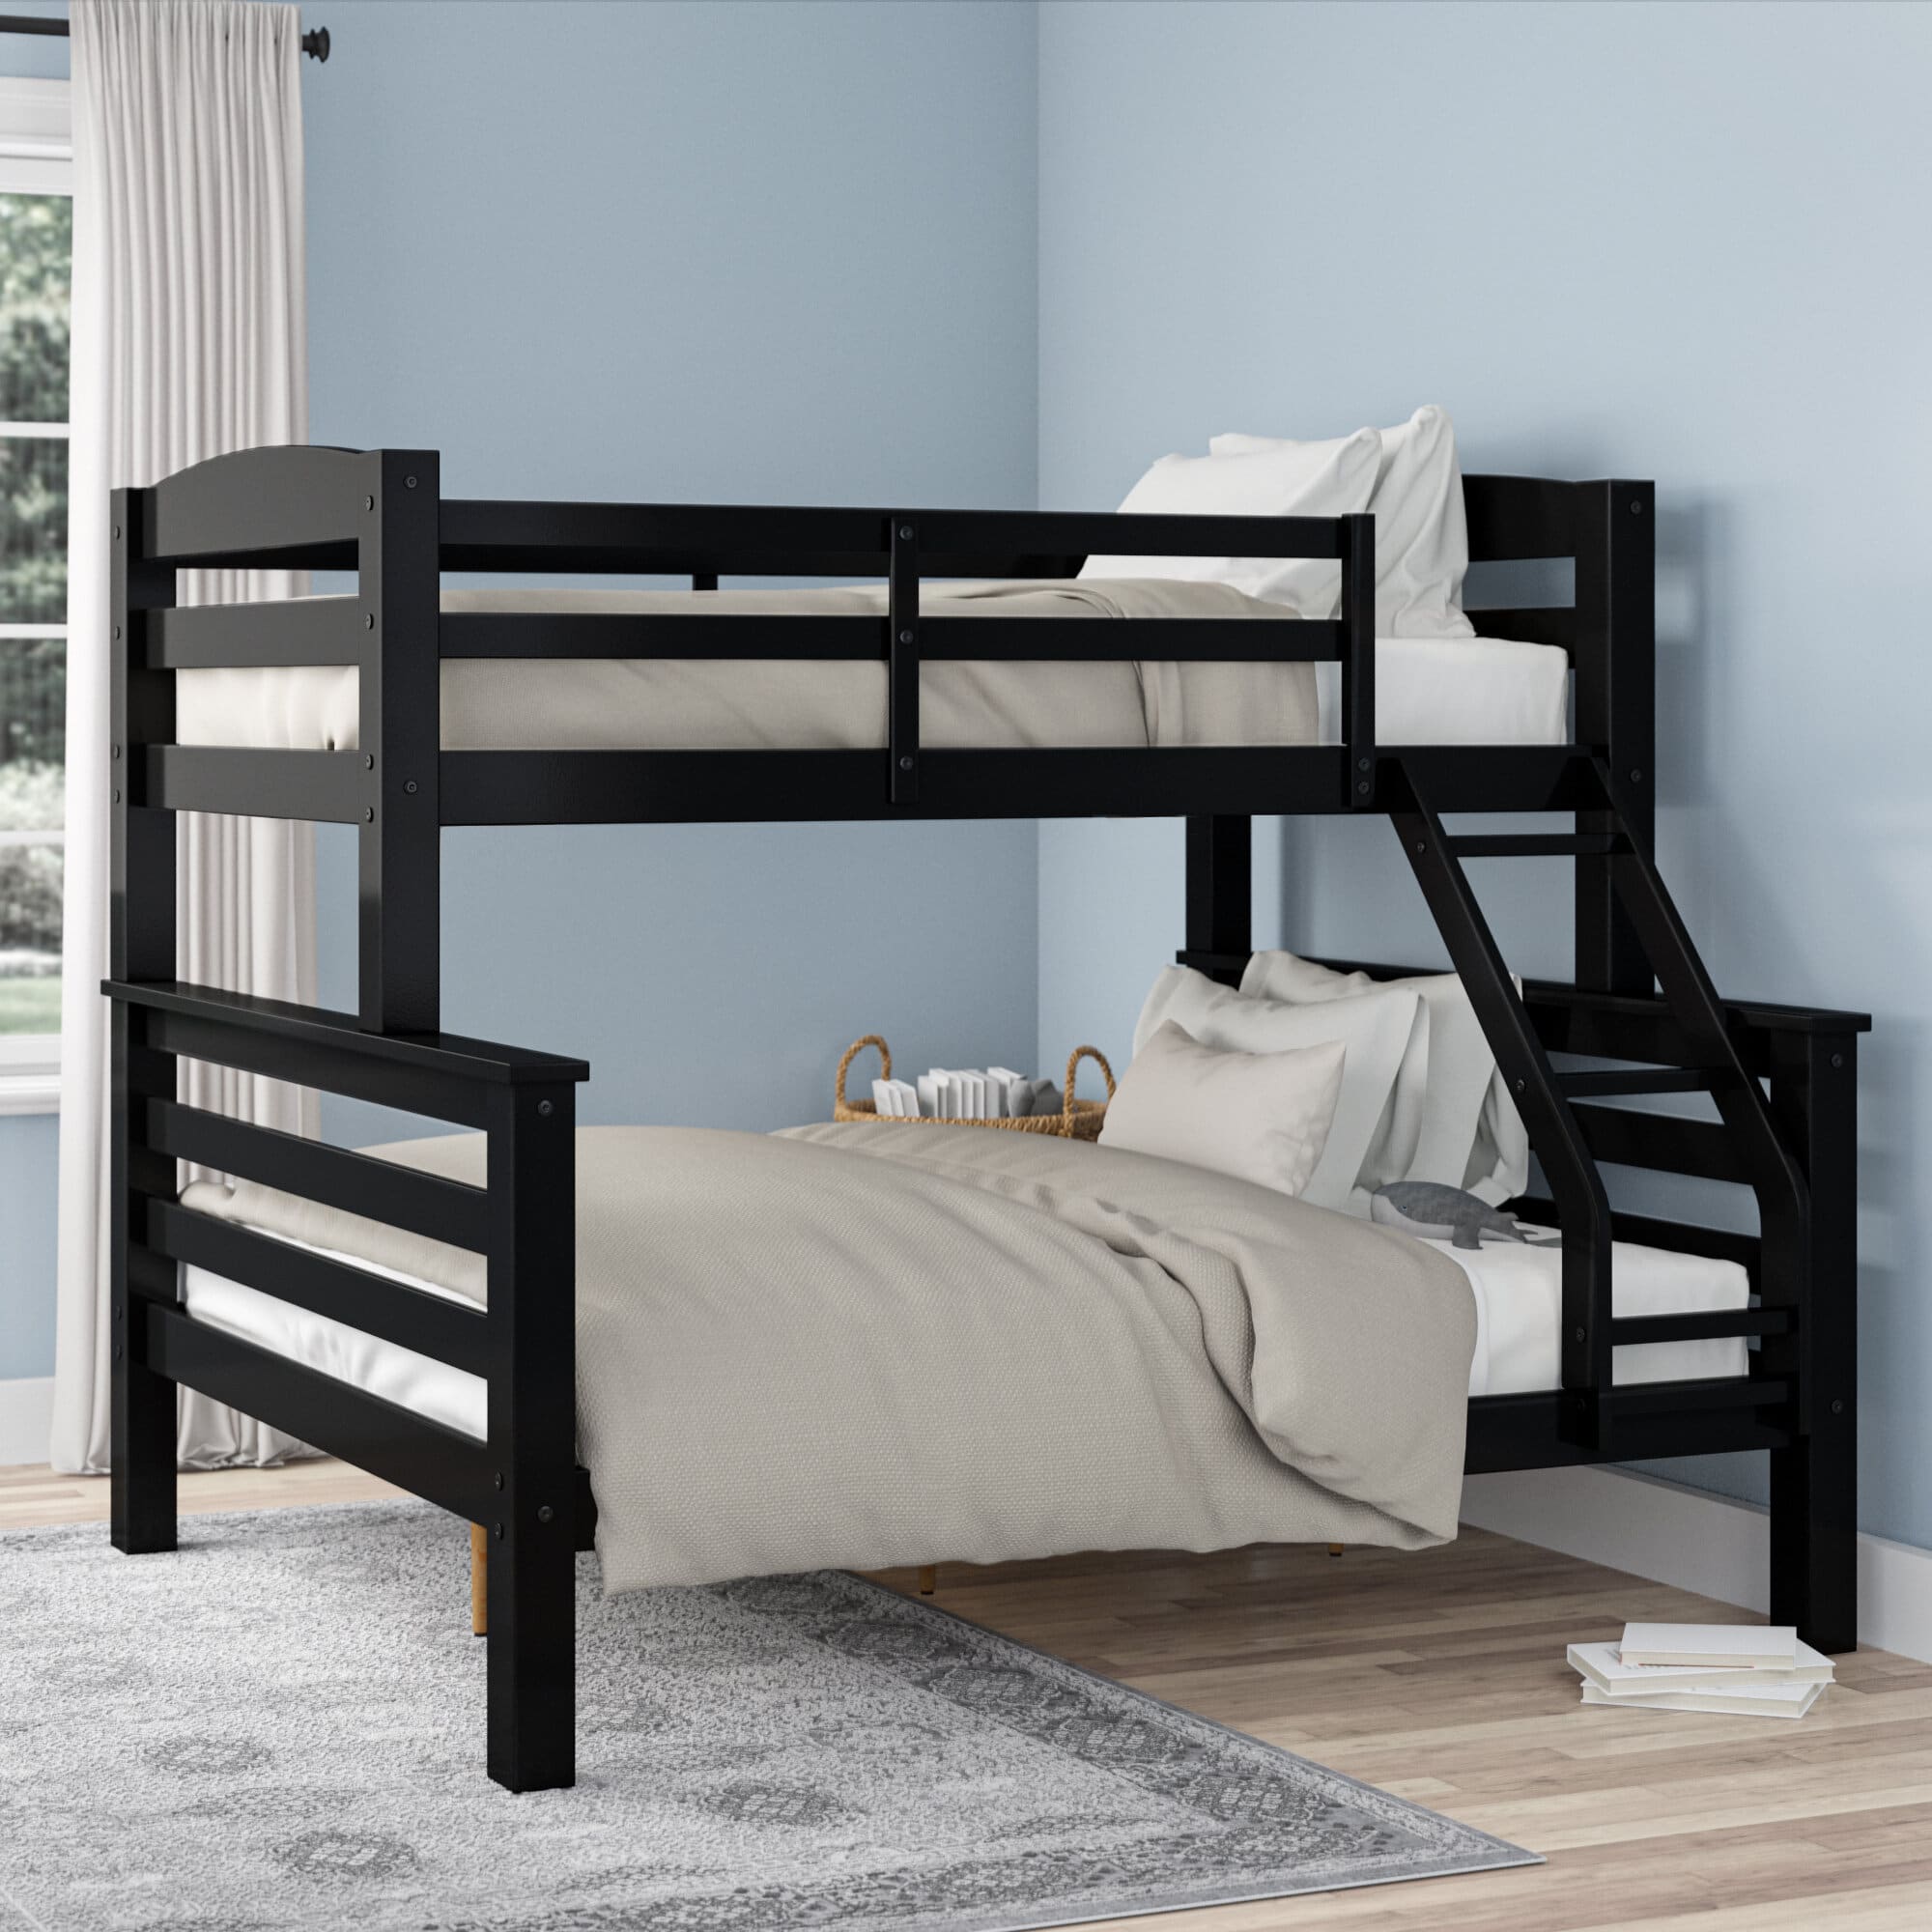 6 Best Twin Over Full Bunk Beds May, Full Size And Twin Size Bunk Beds